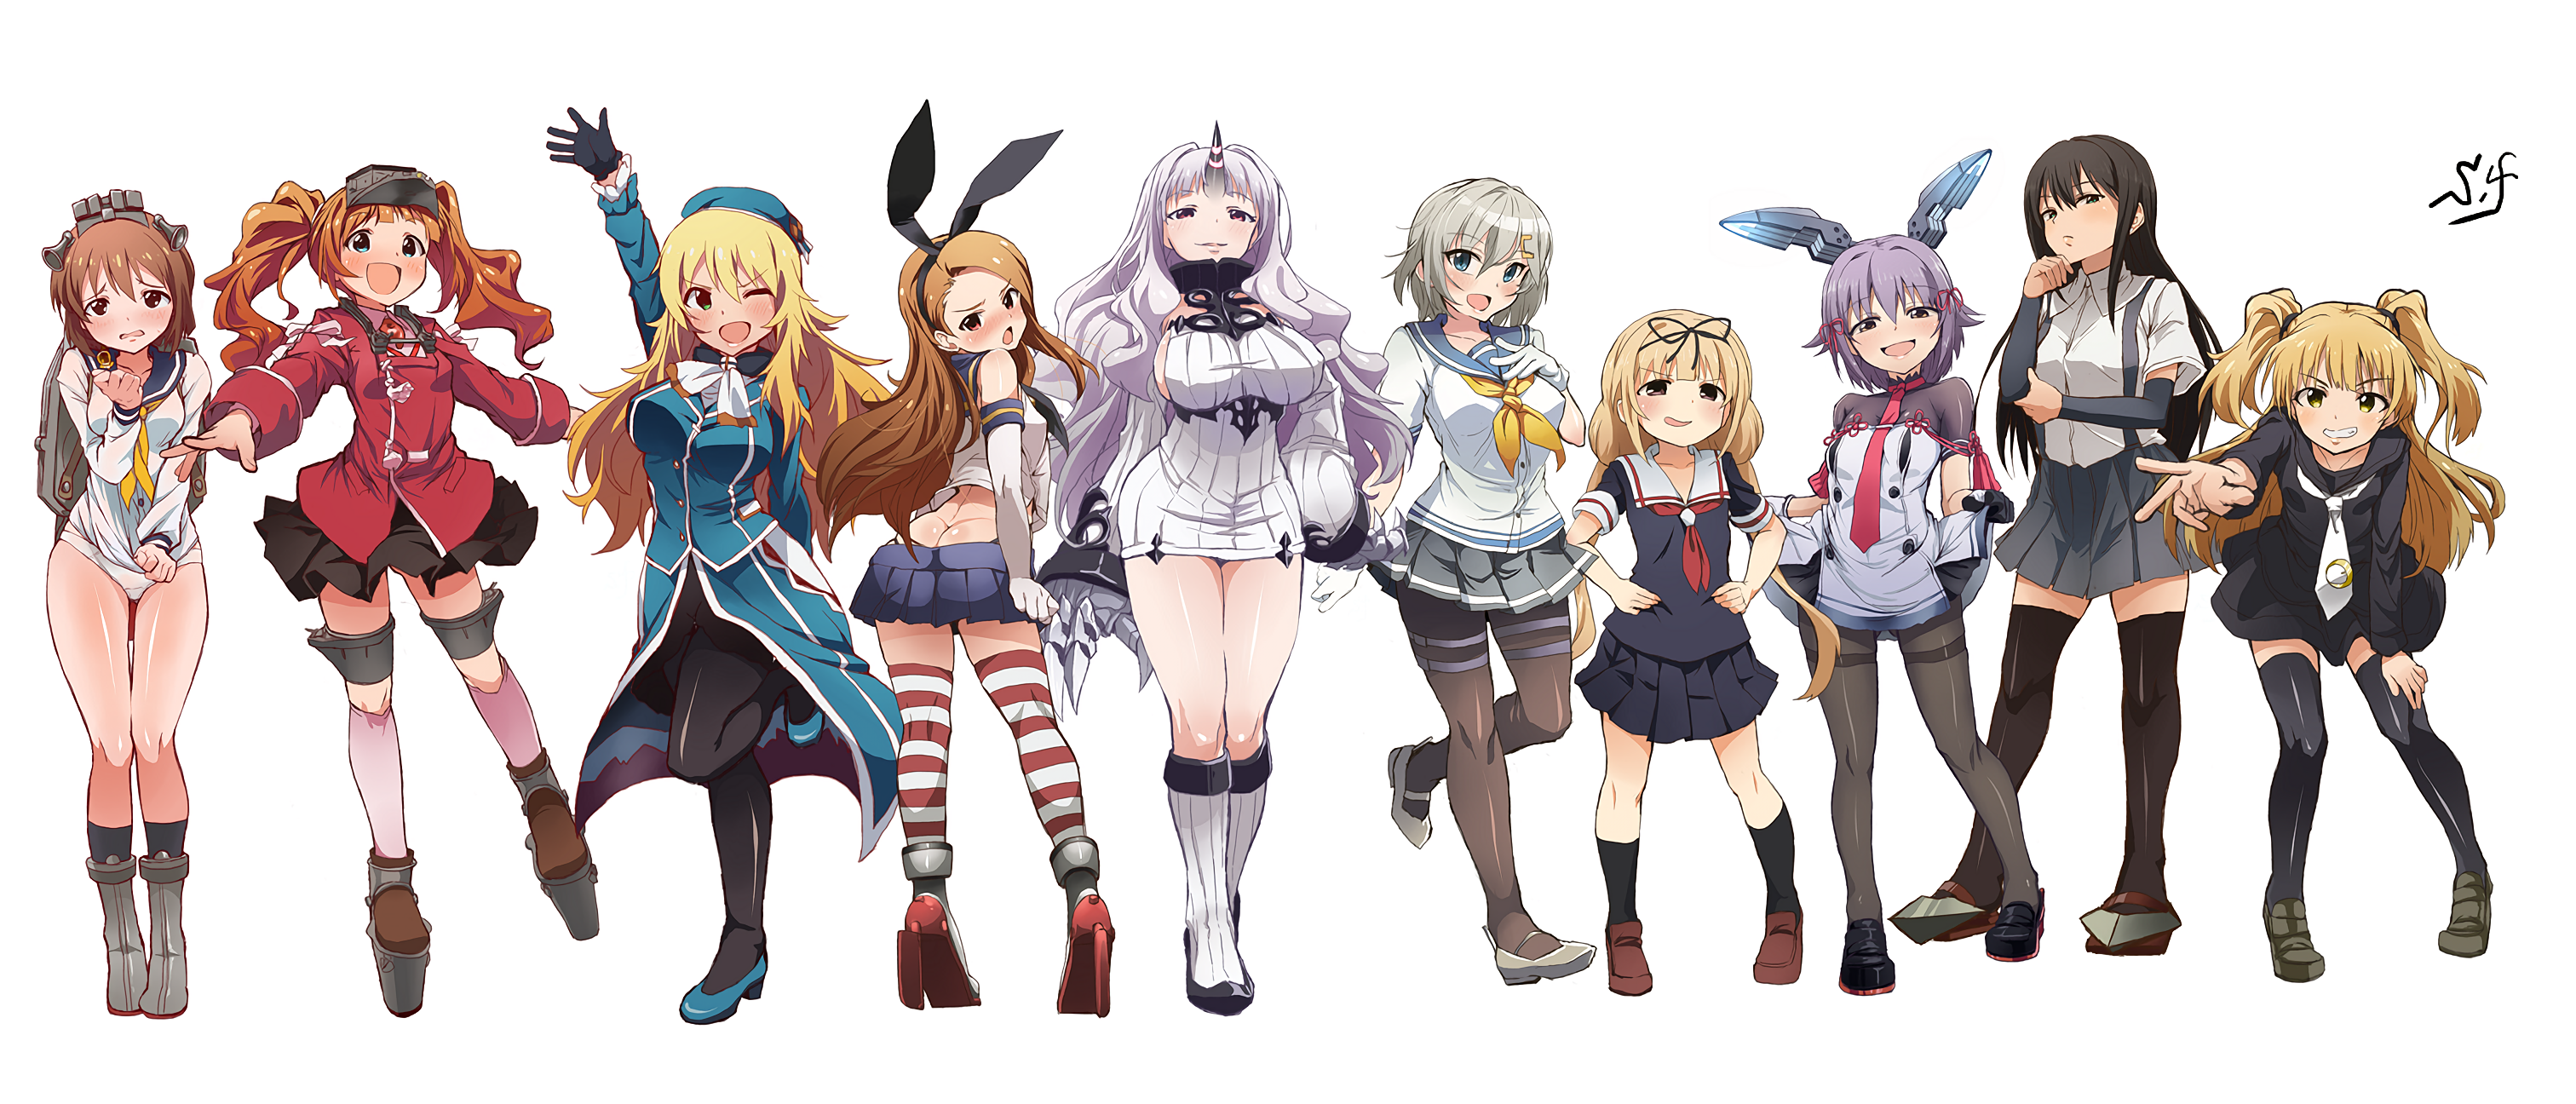 Anime 3024x1296 THE iDOLM@STER Kantai Collection artwork parody anime girls brunette blonde redhead silver hair white hair black hair twintails panties skirt black skirts stockings socks shoes heels red heels  high heels thighs thick thigh legs underwear pantyhose black pantyhose tie bunny ears hat miniskirt school uniform shirt blue eyes red eyes black eyes purple hair smiling legs together open mouth horns yellow eyes Shift